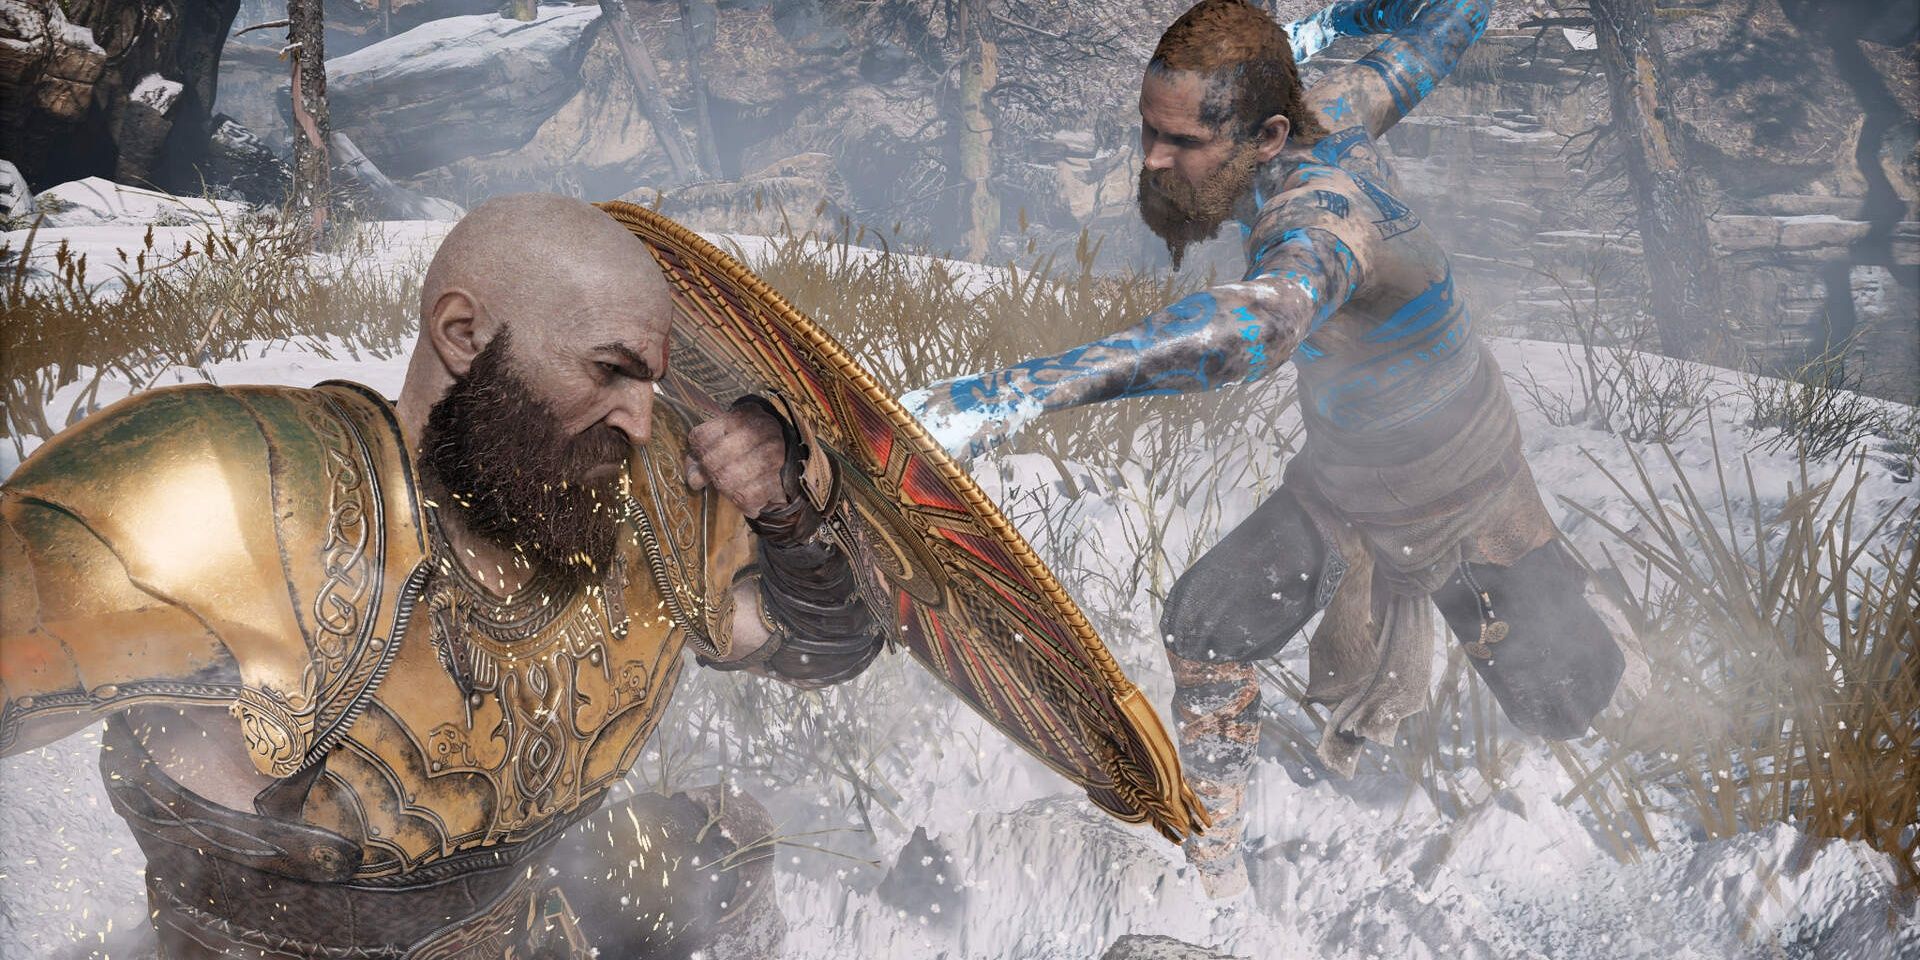 Kratos in a defensive stance with his shield against Baldur